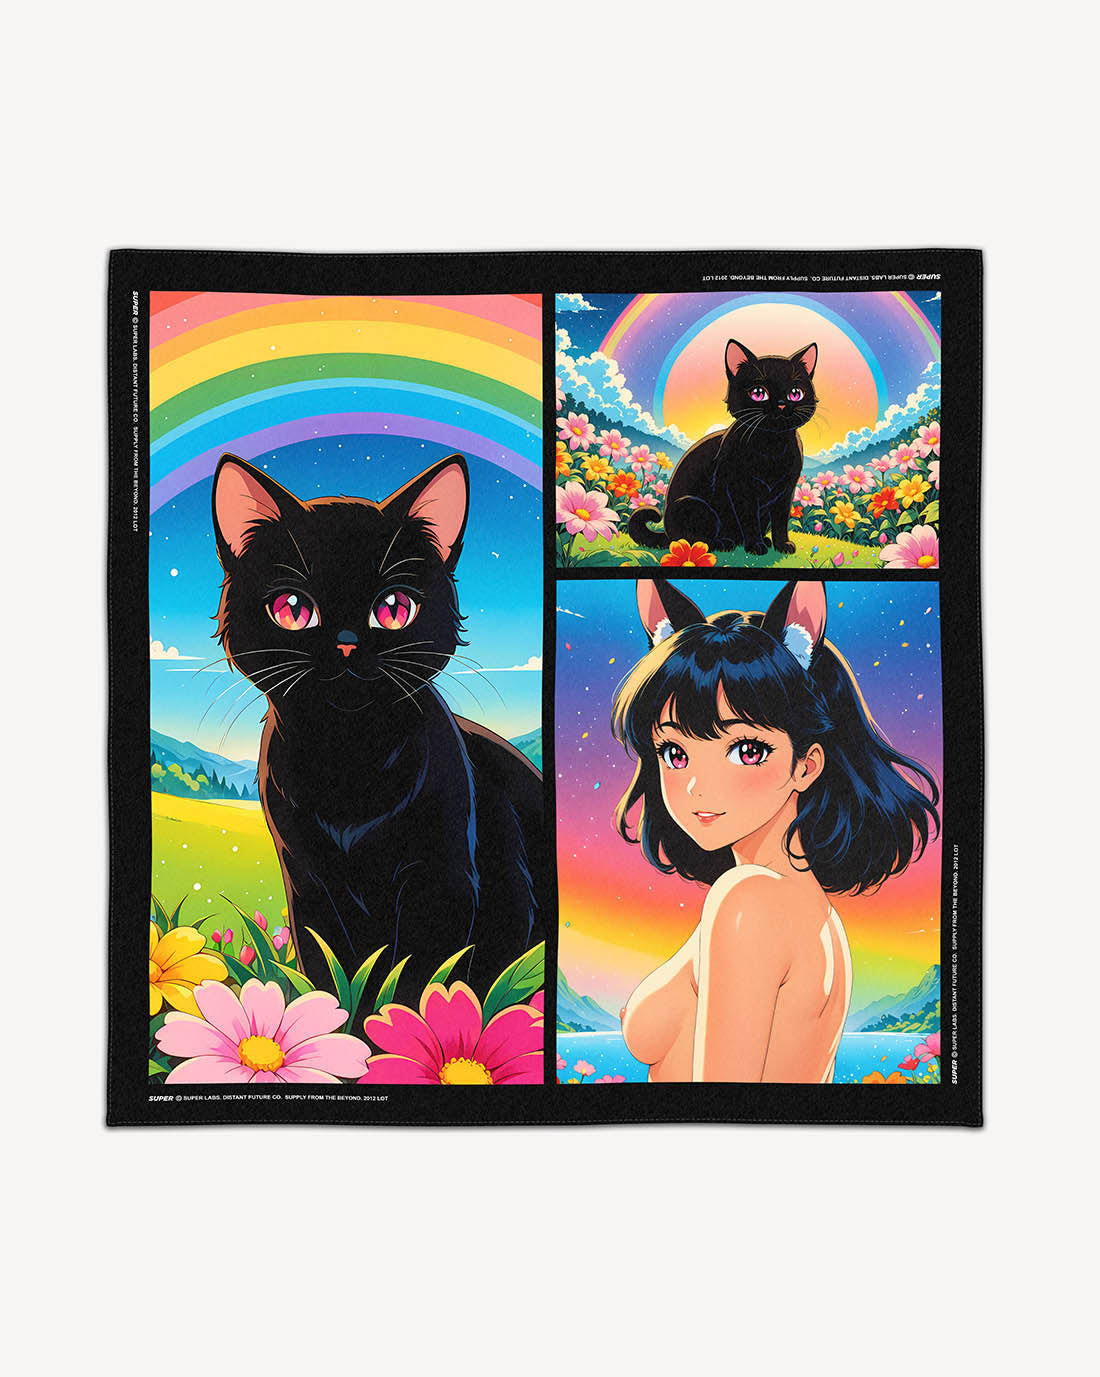 Large designer scarf with anime-inspired graphics of a kitty cat and cat girl.